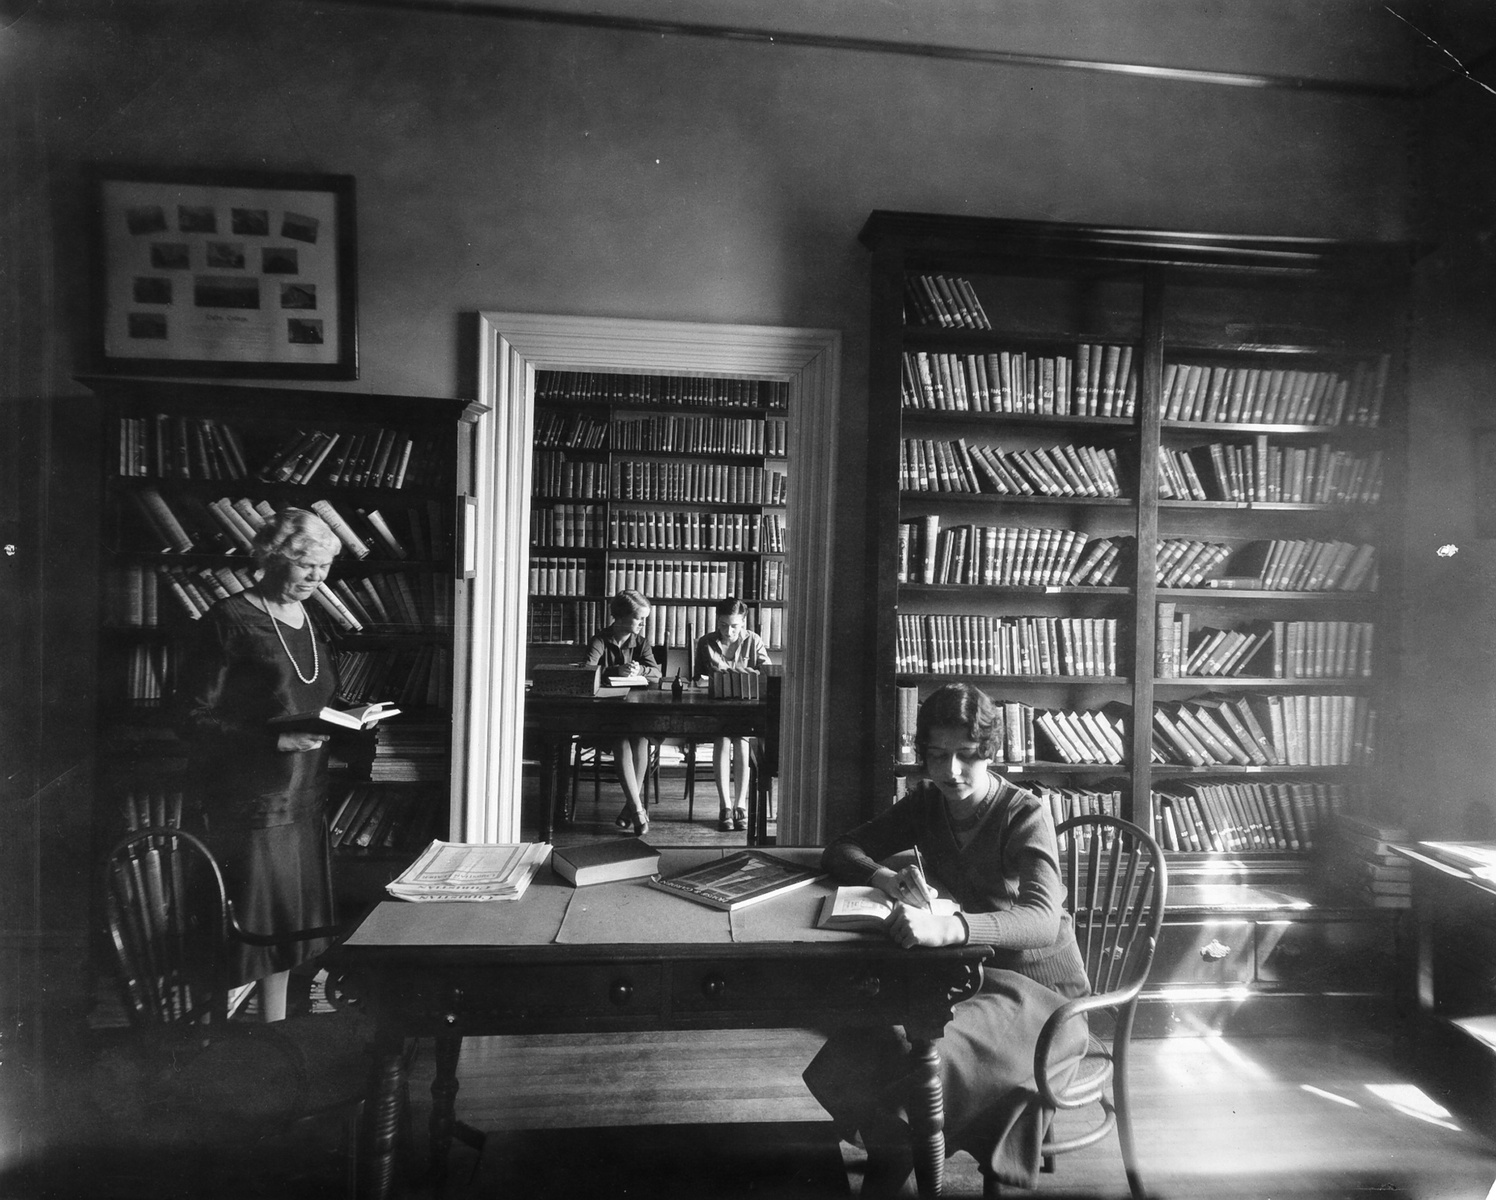 Black and white historic photograph of women studying in a library 